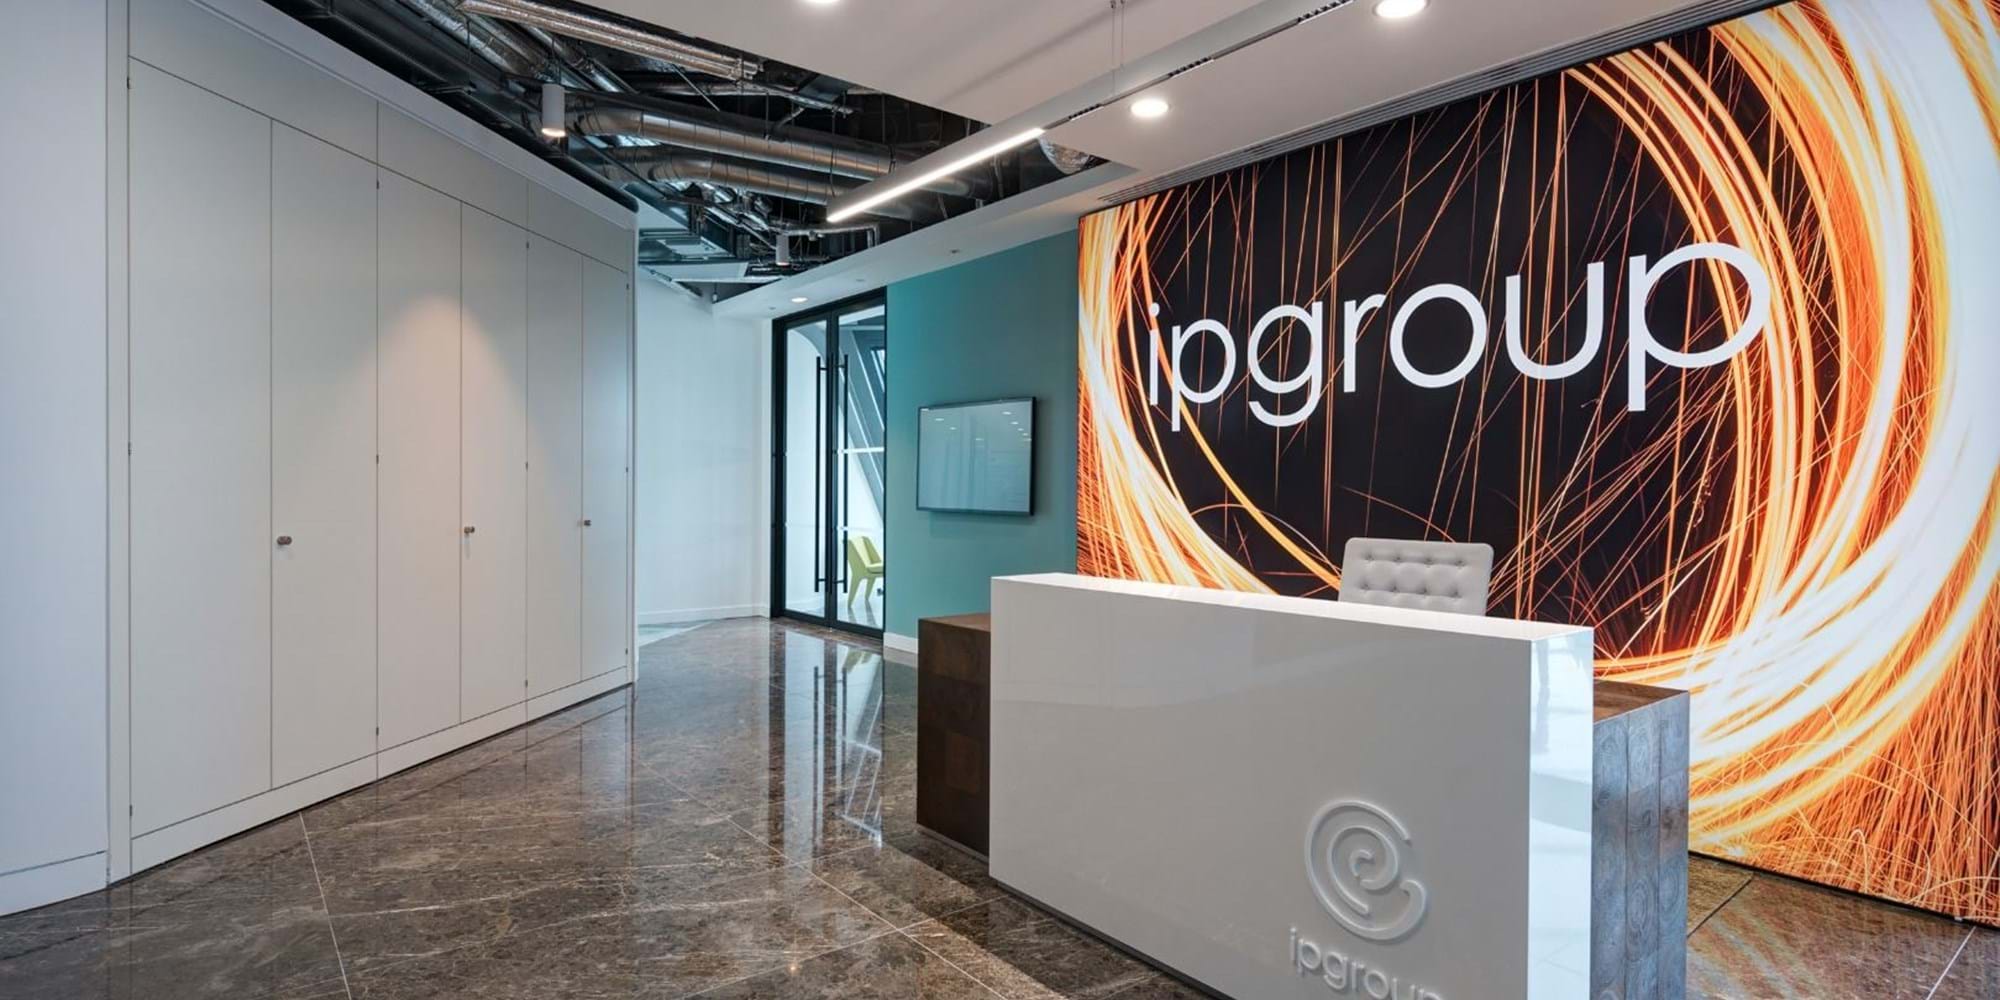 Modus Workspace office design, fit out and refurbishment - IPG - IPG 02 highres sRGB.jpg